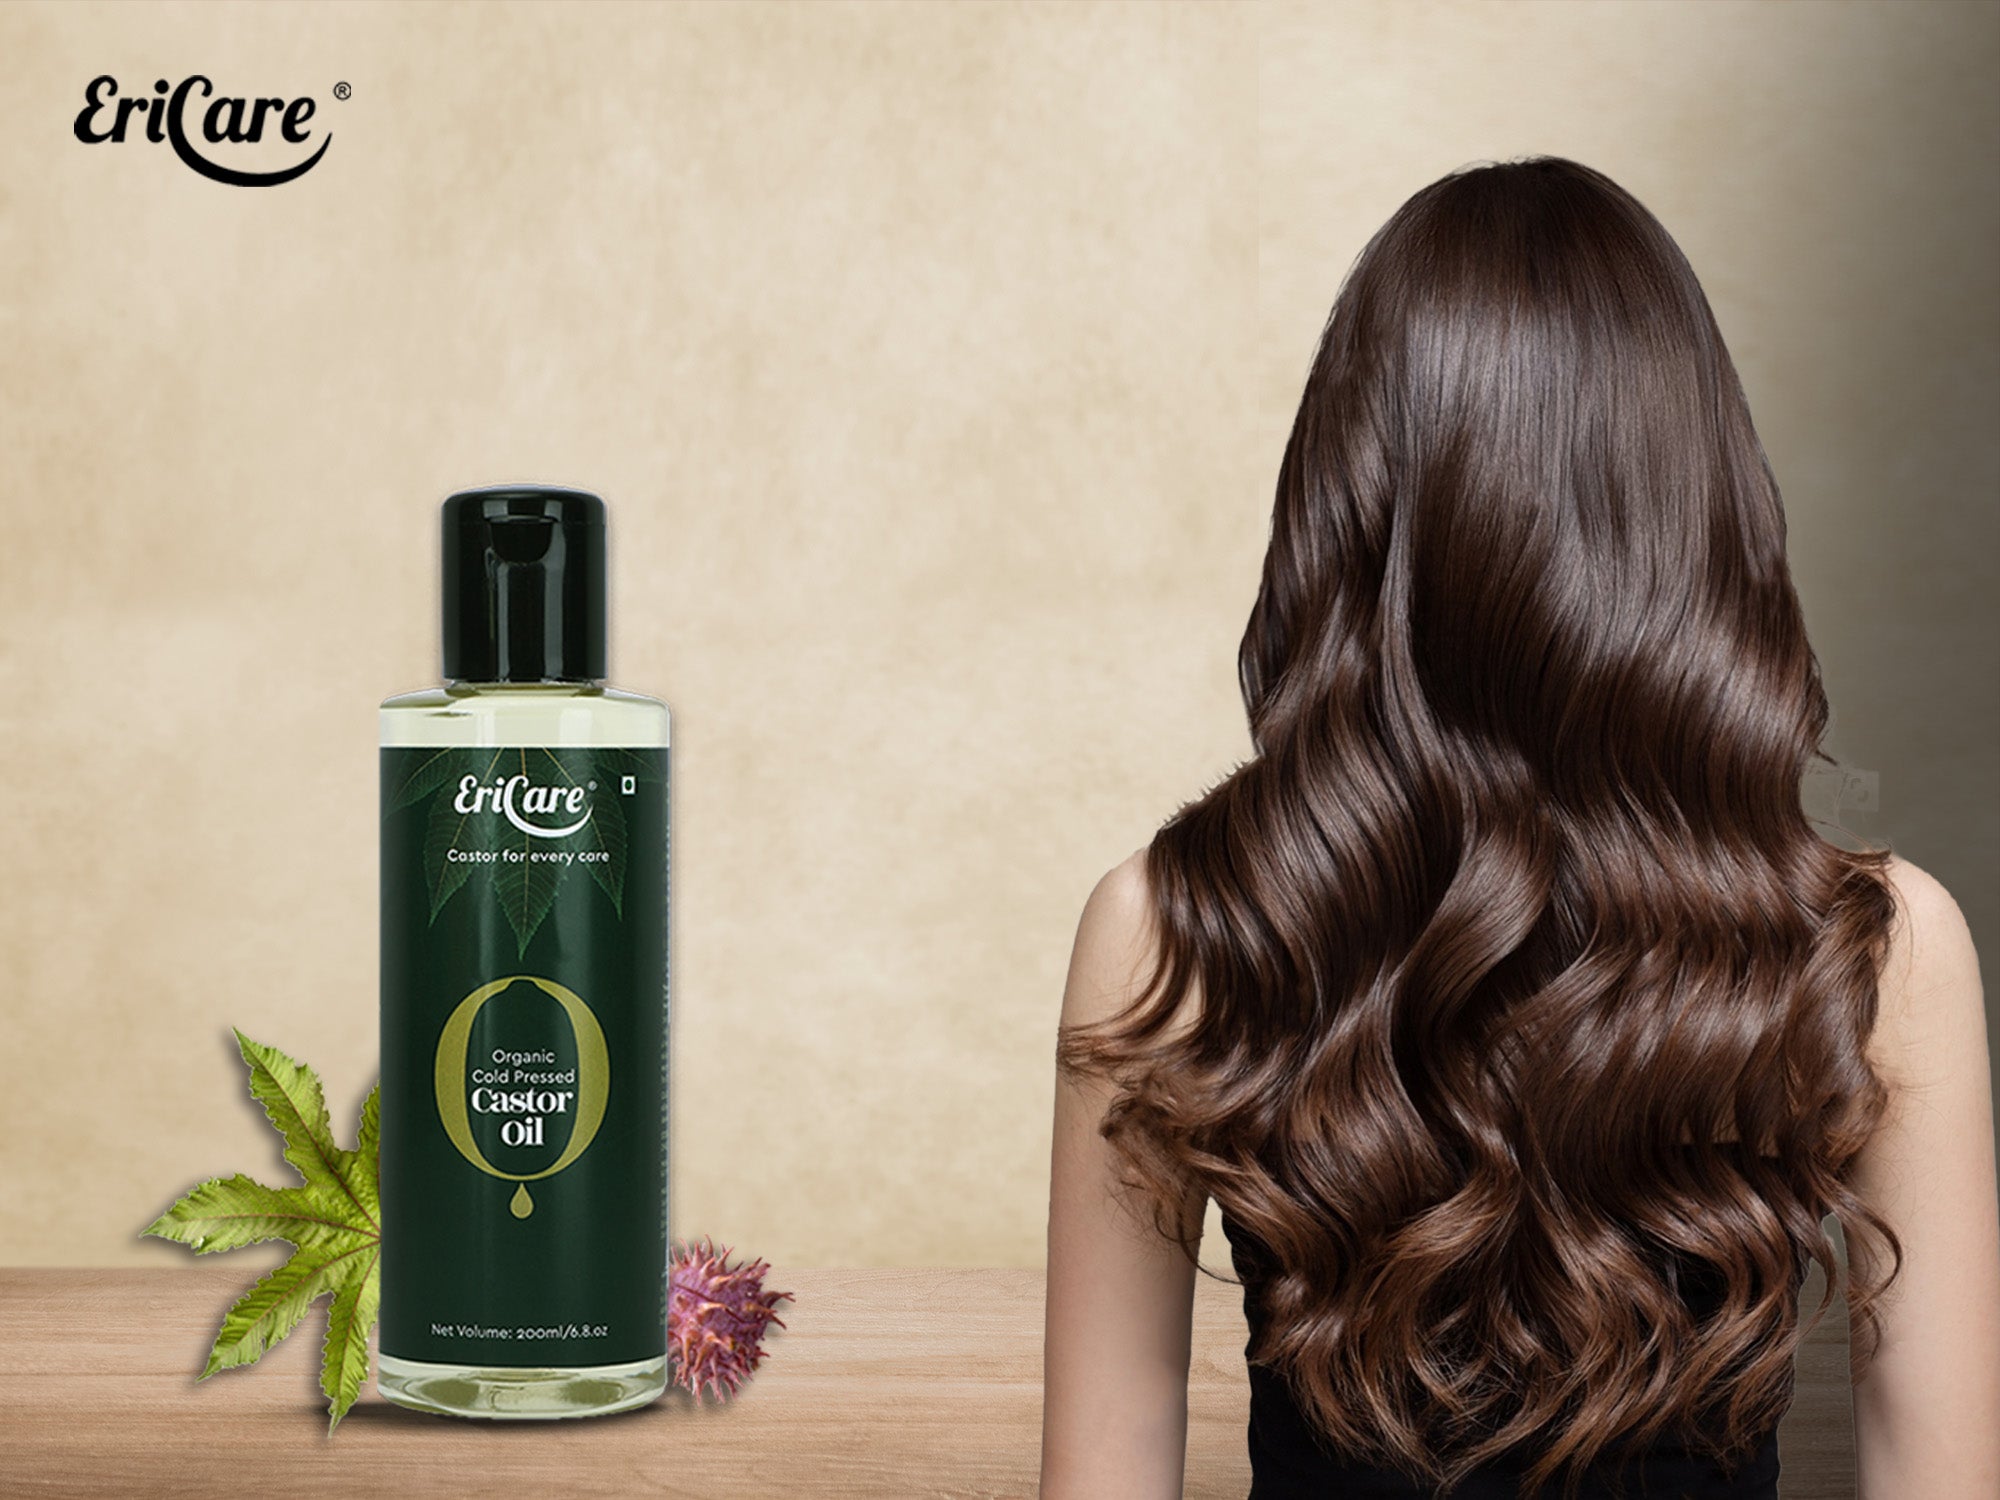 How by applying Organic cold-pressed castor oil one can improve the hair texture and combat different hair problems